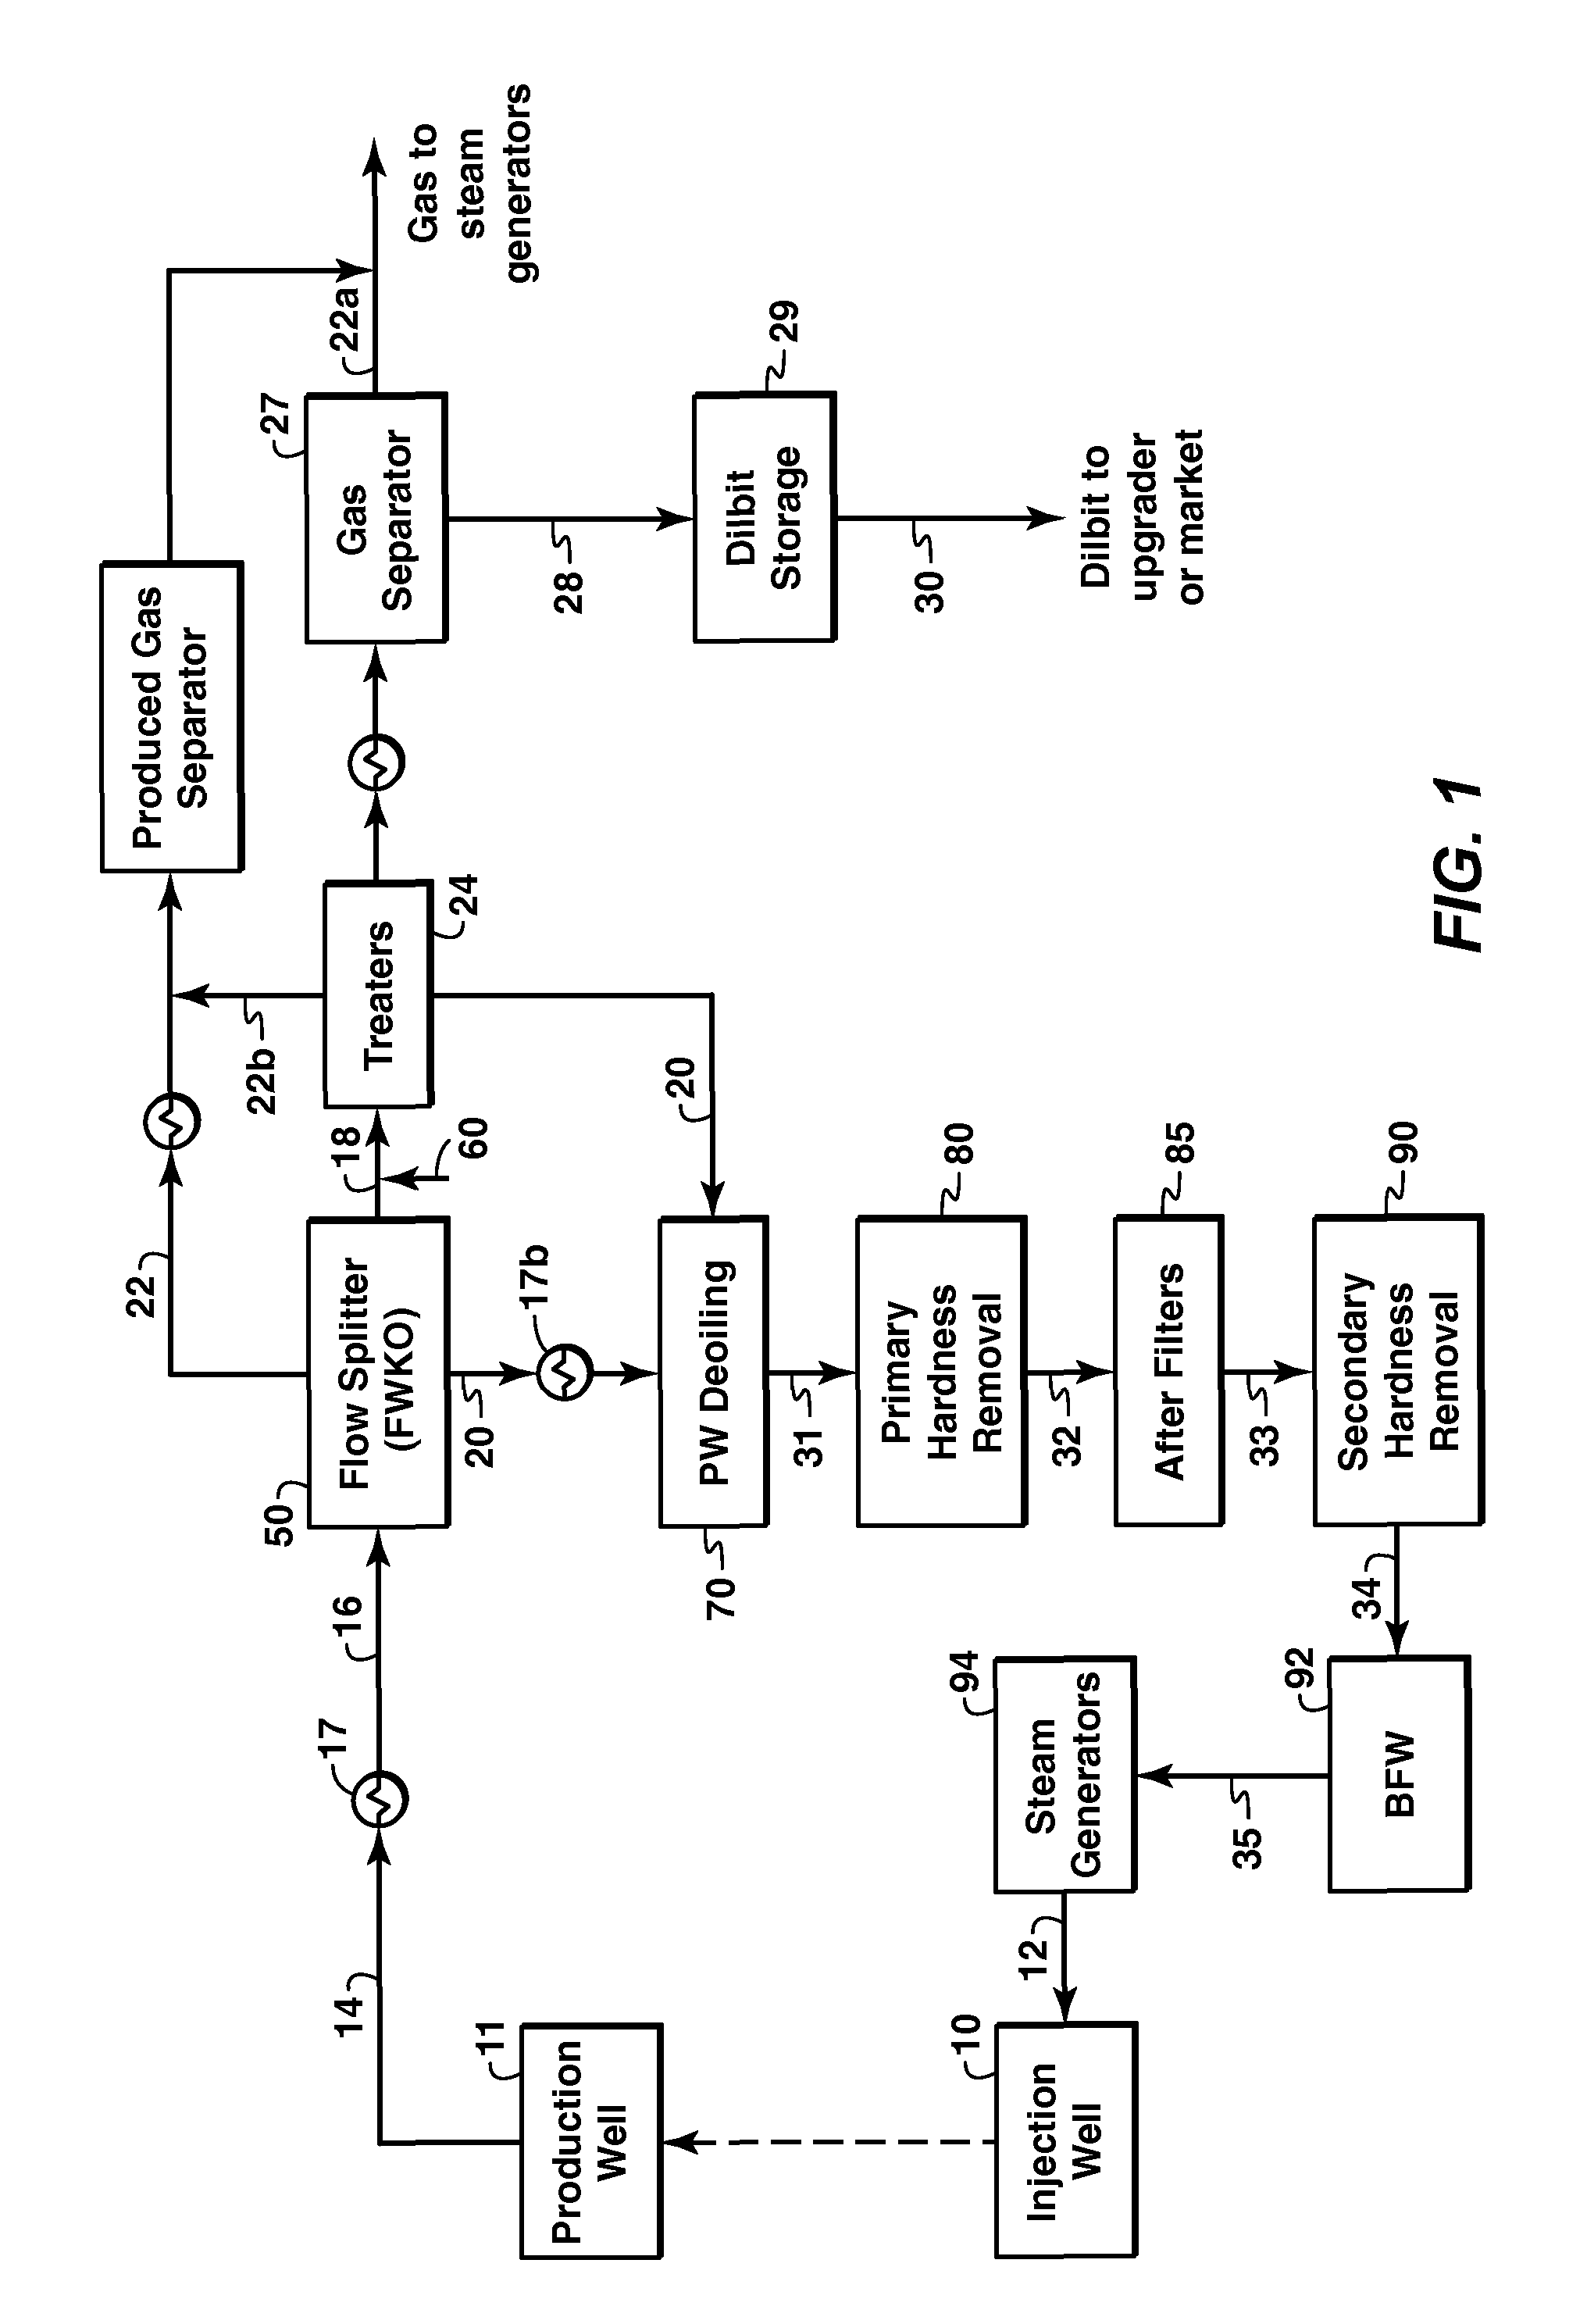 Integration of an in-situ recovery operation with a mining operation